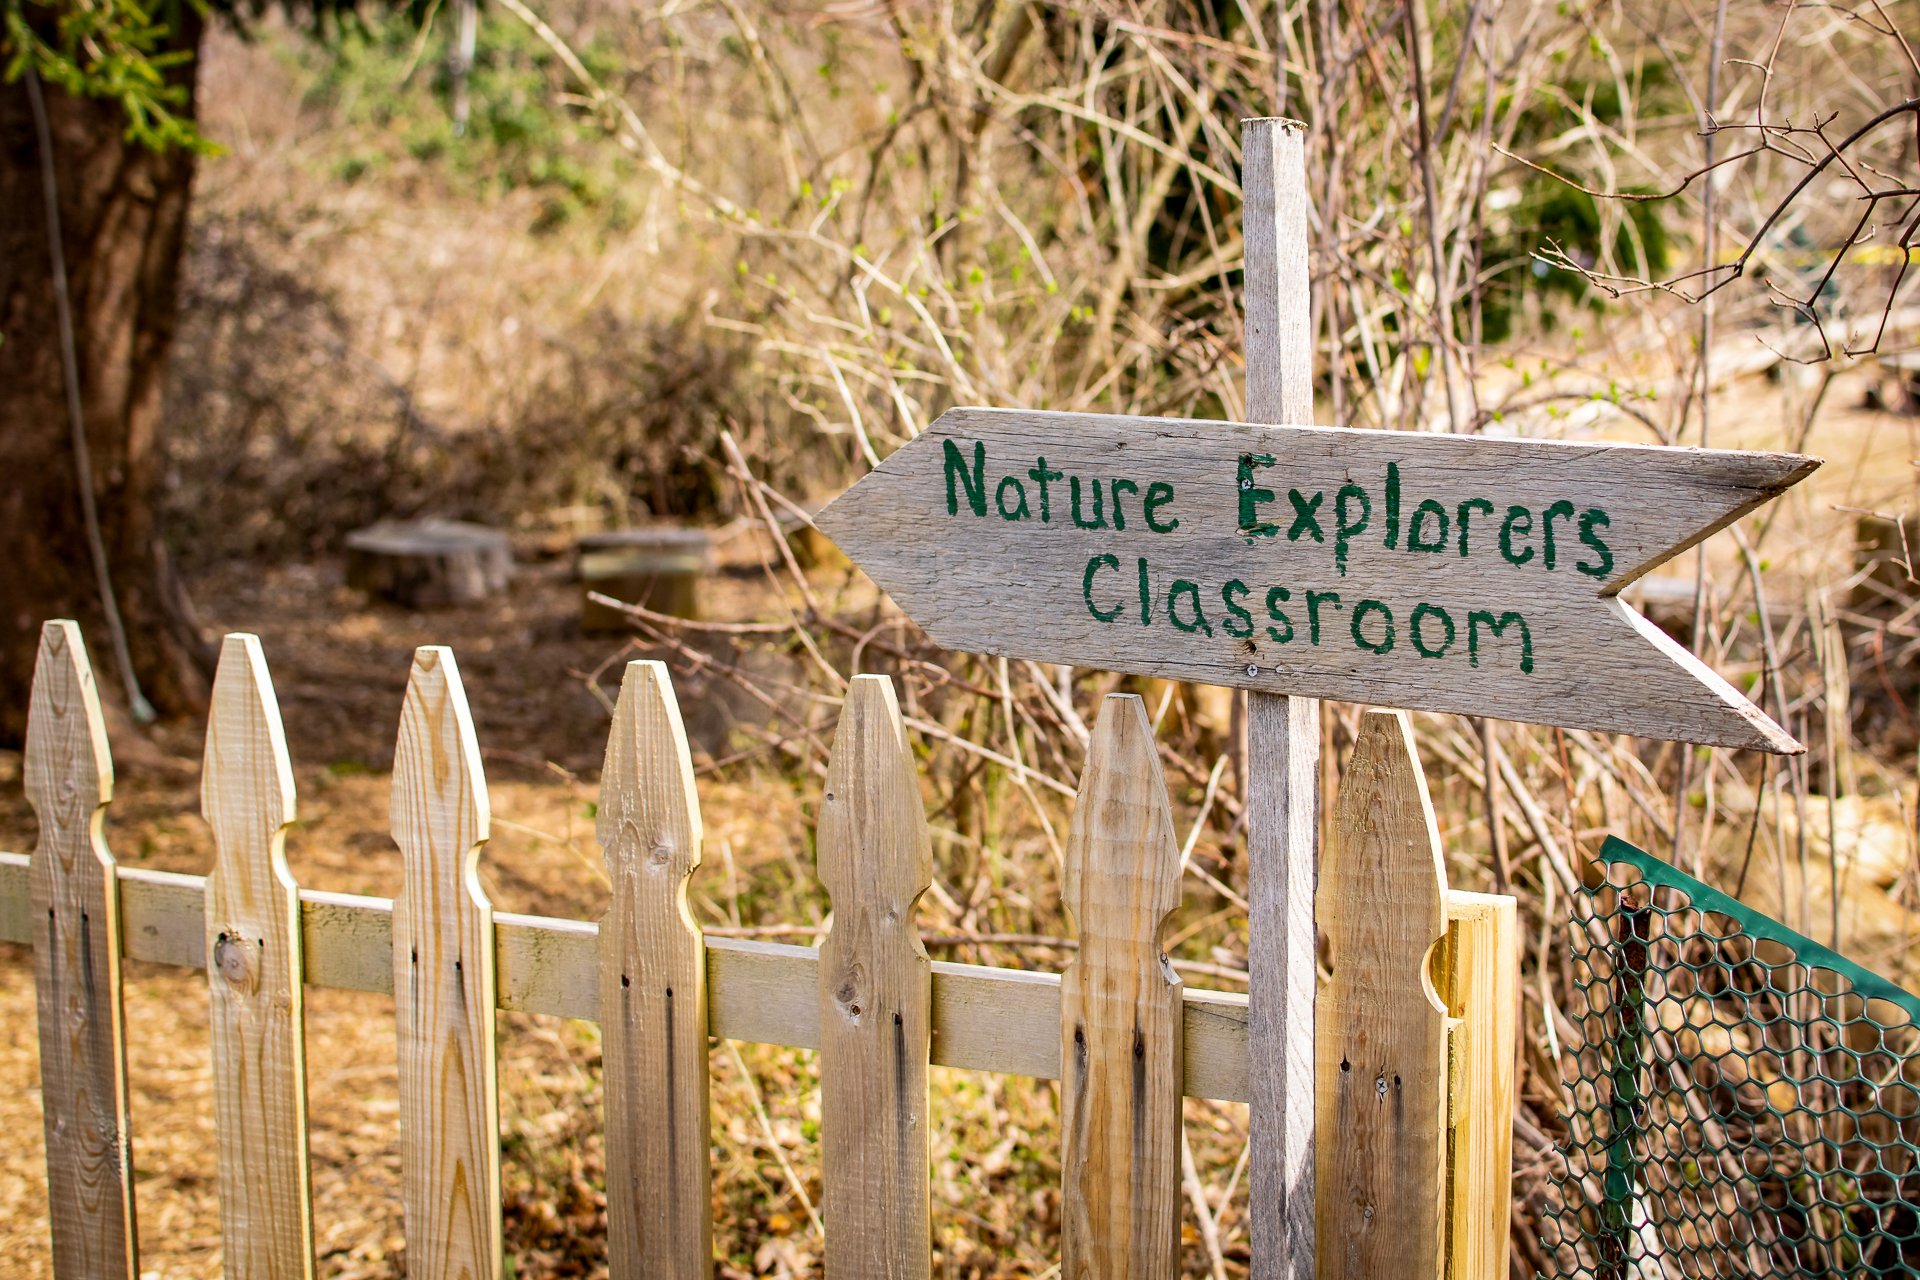 A wooden sign shaped like an arrow reads "Nature Explorers Classroom" and points to a Nature Play Area at Long Pasture Wildlife Sanctuary